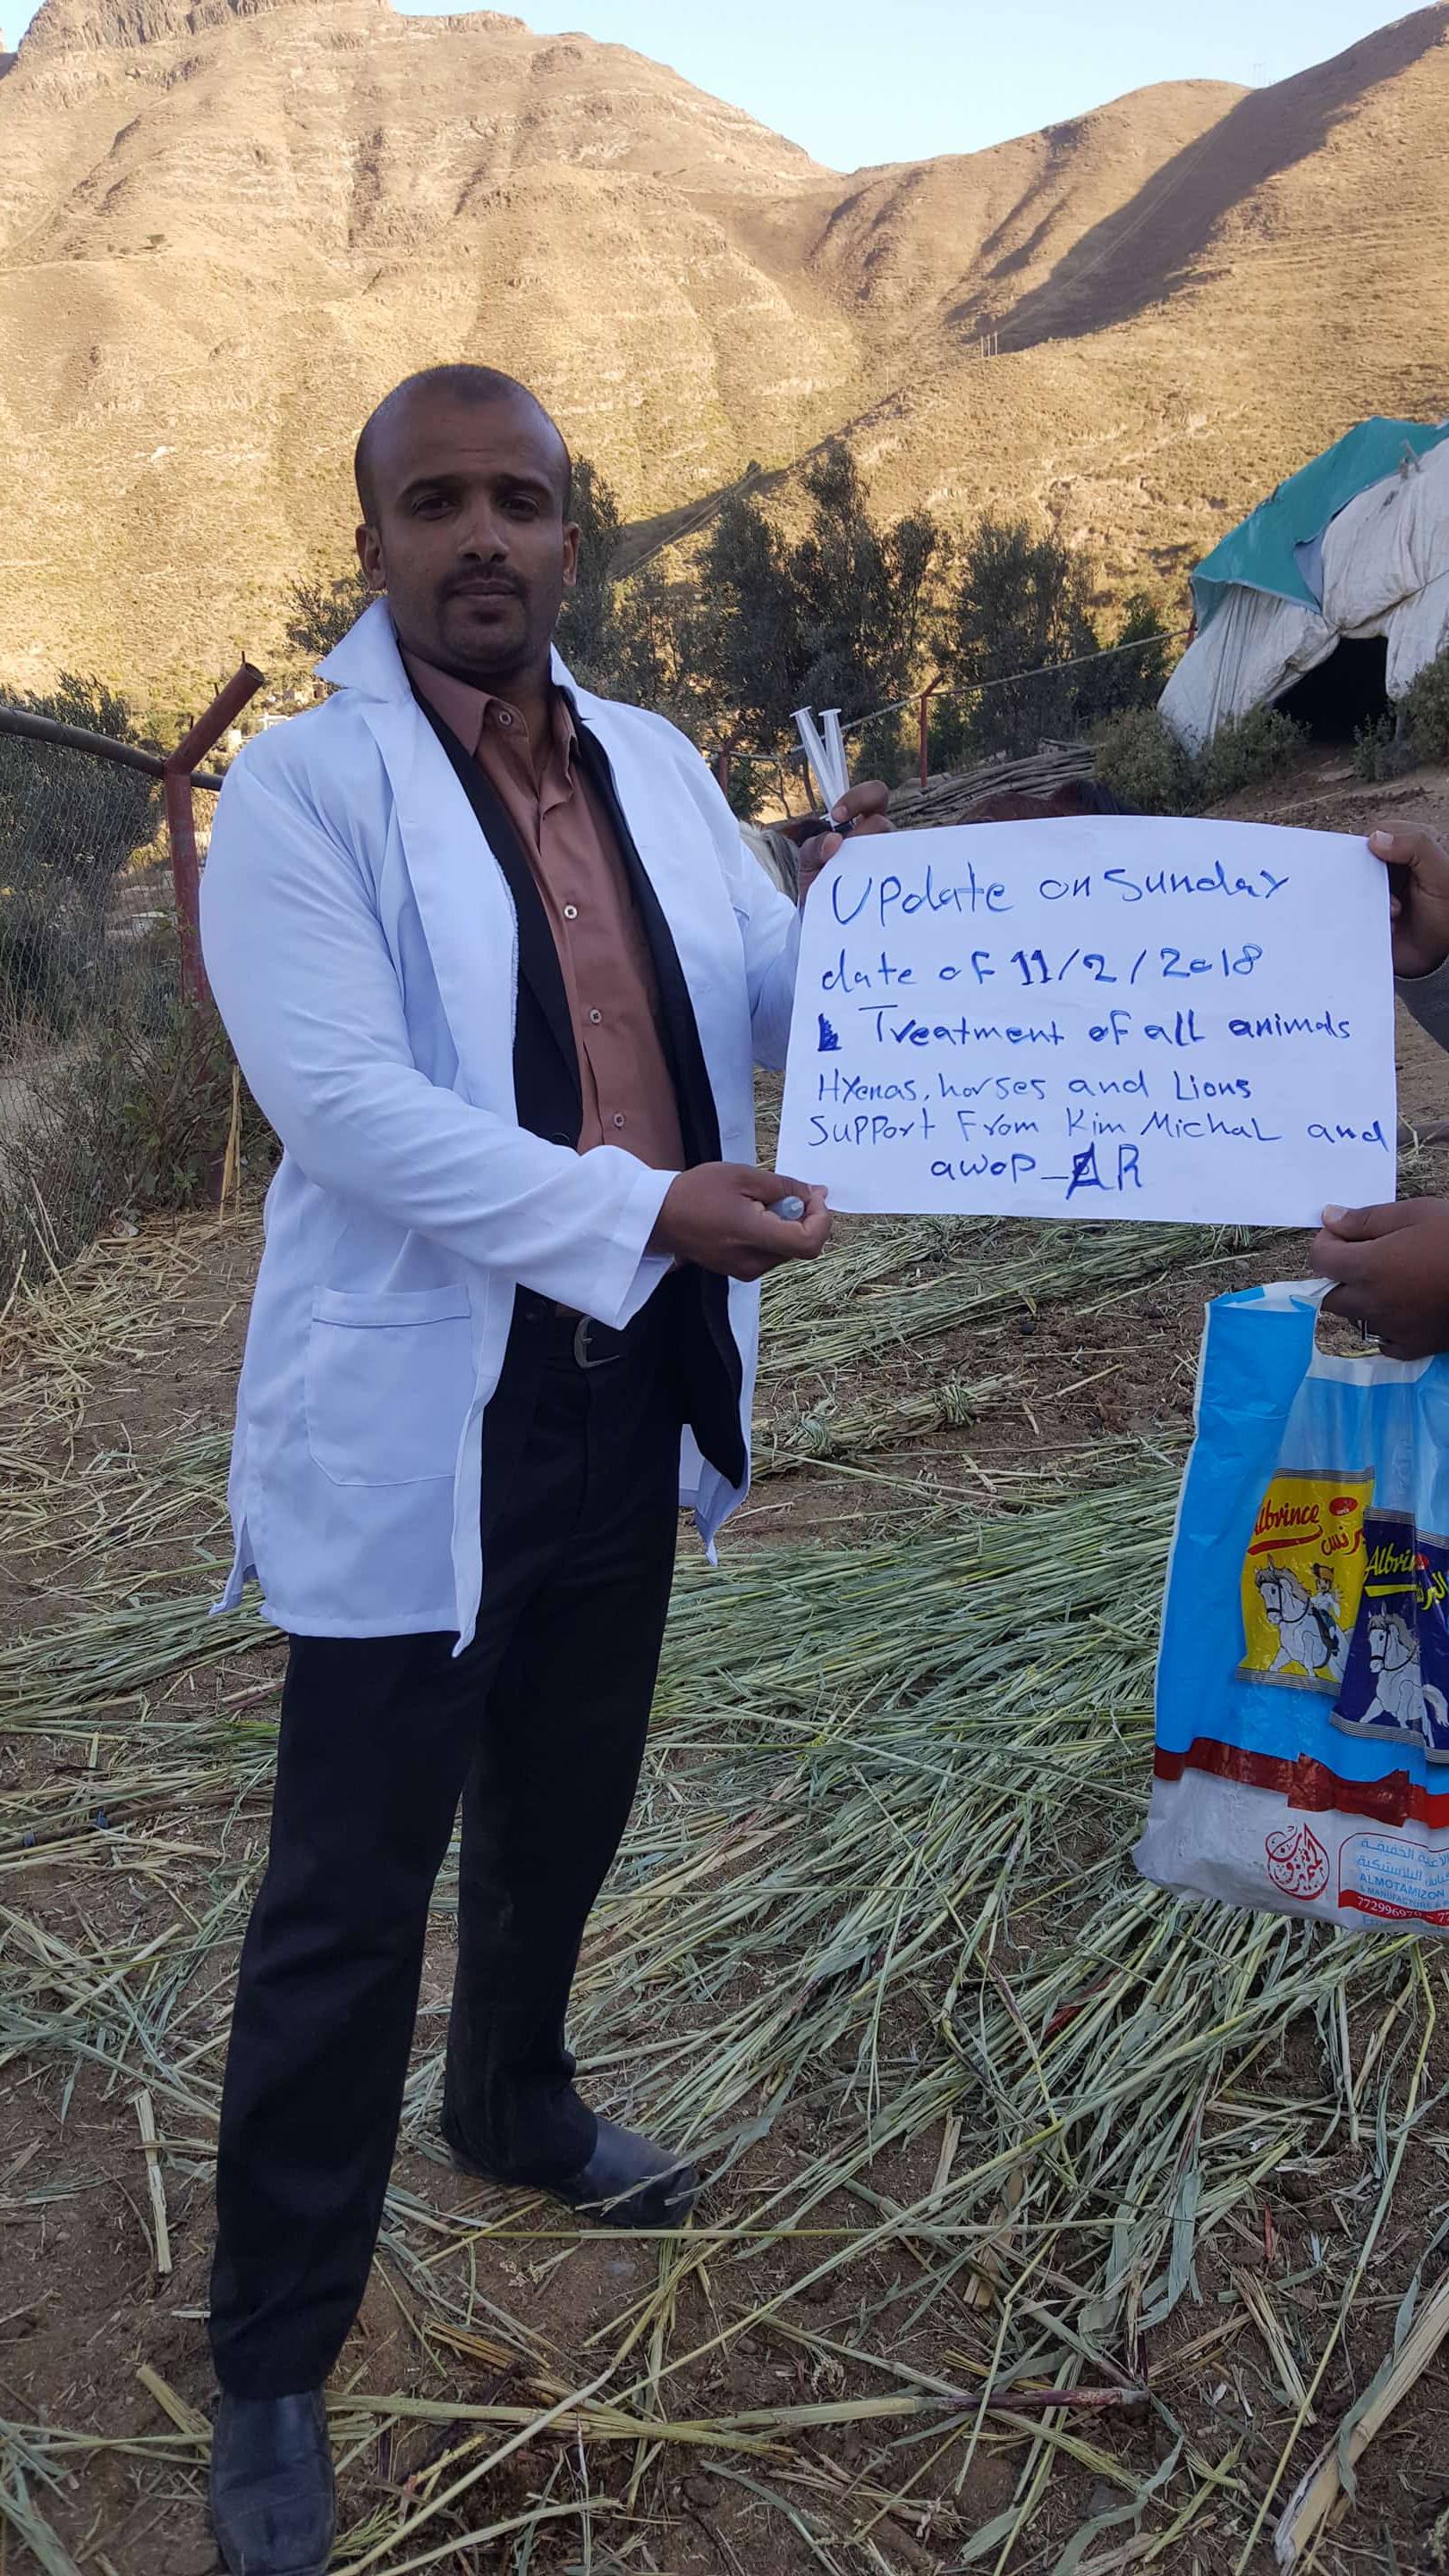 IBB ZOO rescue MUAAD WITH OUR SIGN 11 FEB 2018 treatments hyenas lions, horses etc by OWAP AR .jpg